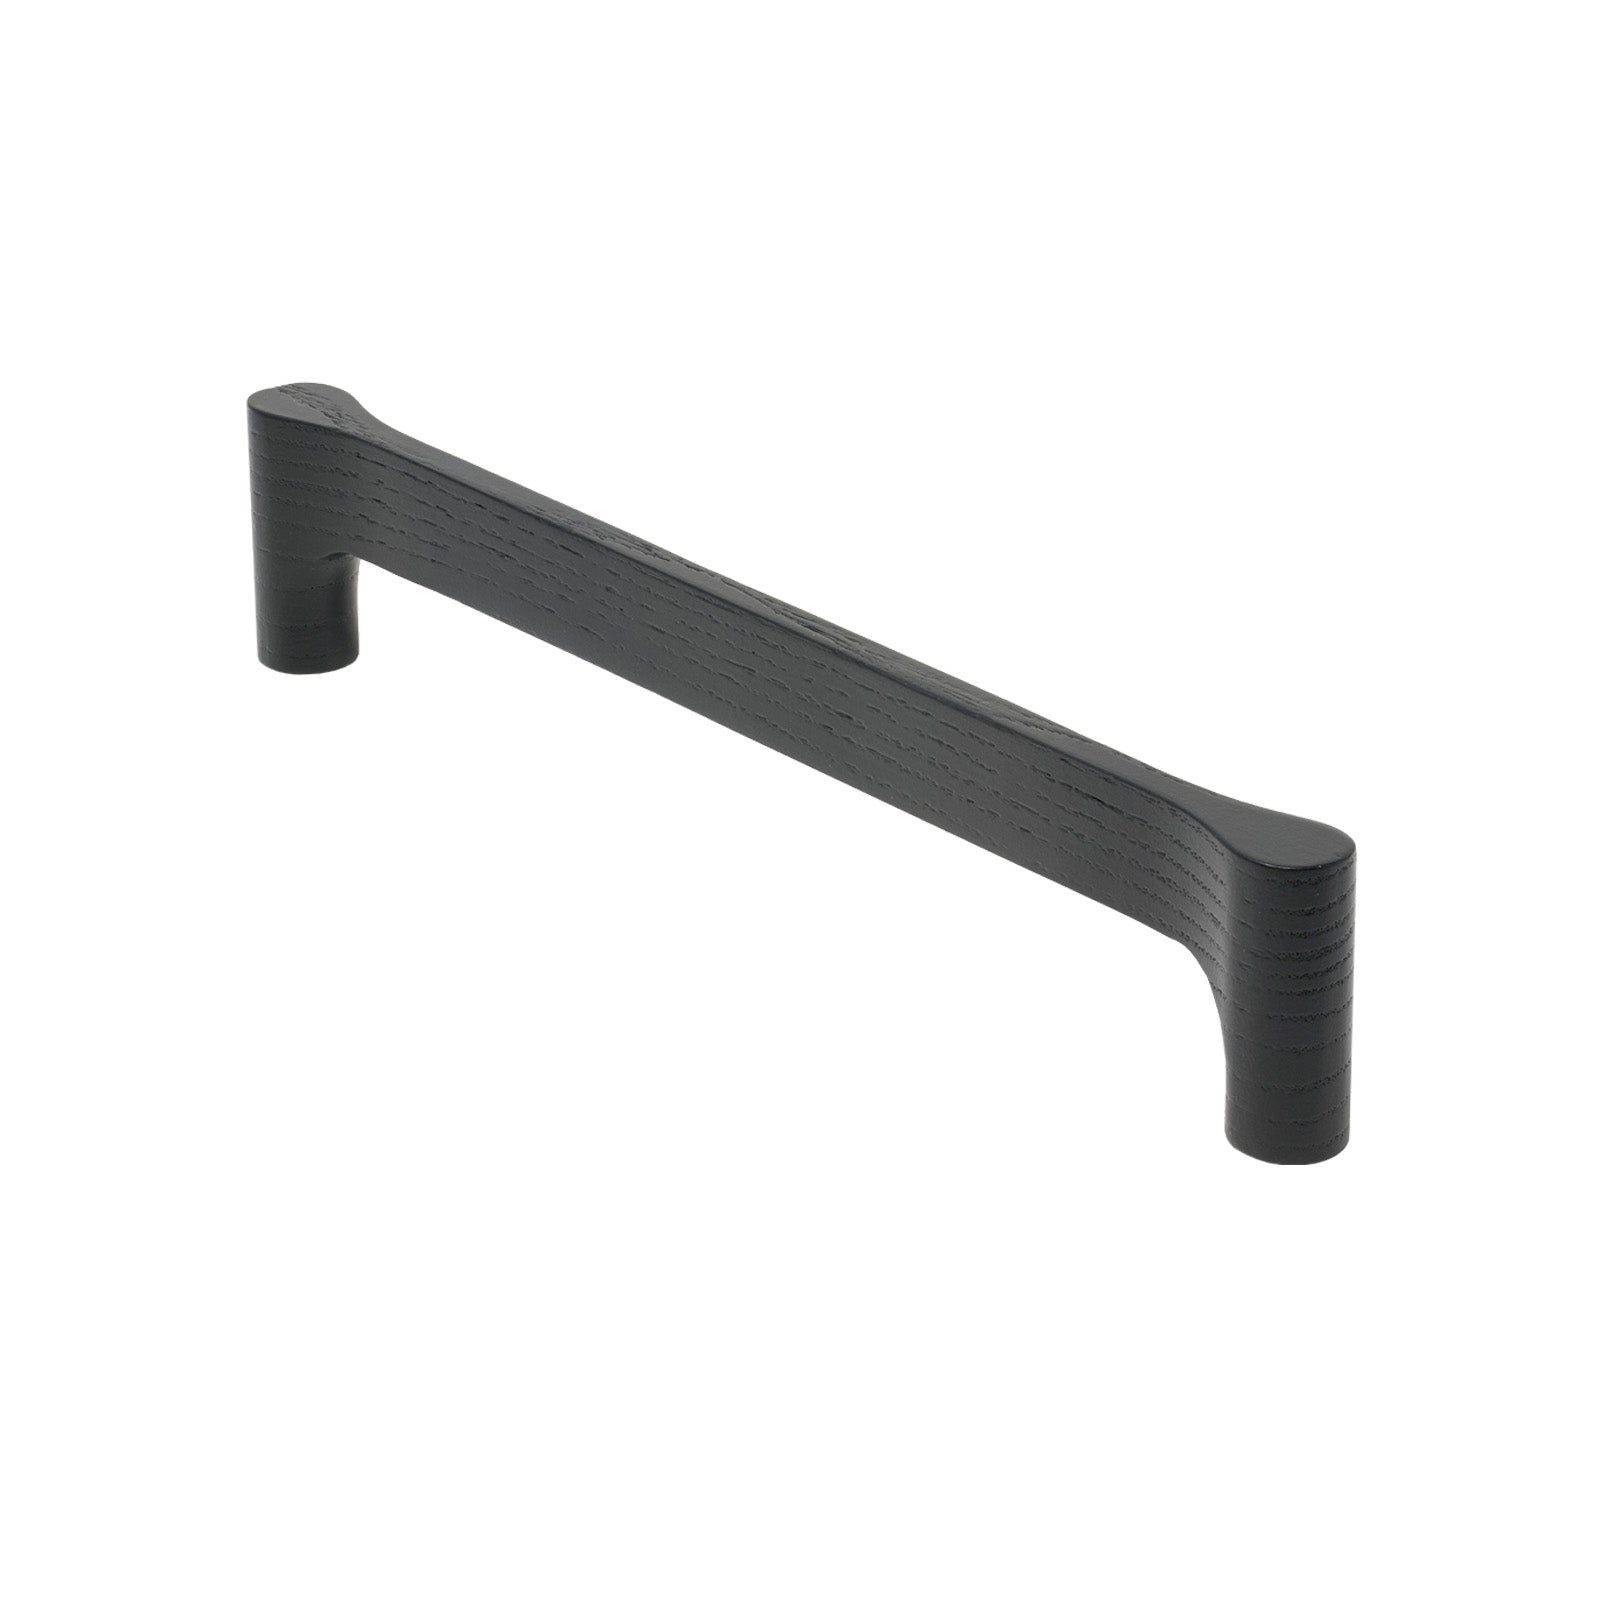 SHOW 224mm Gio Cabinet Pull Handle In Ash Finish